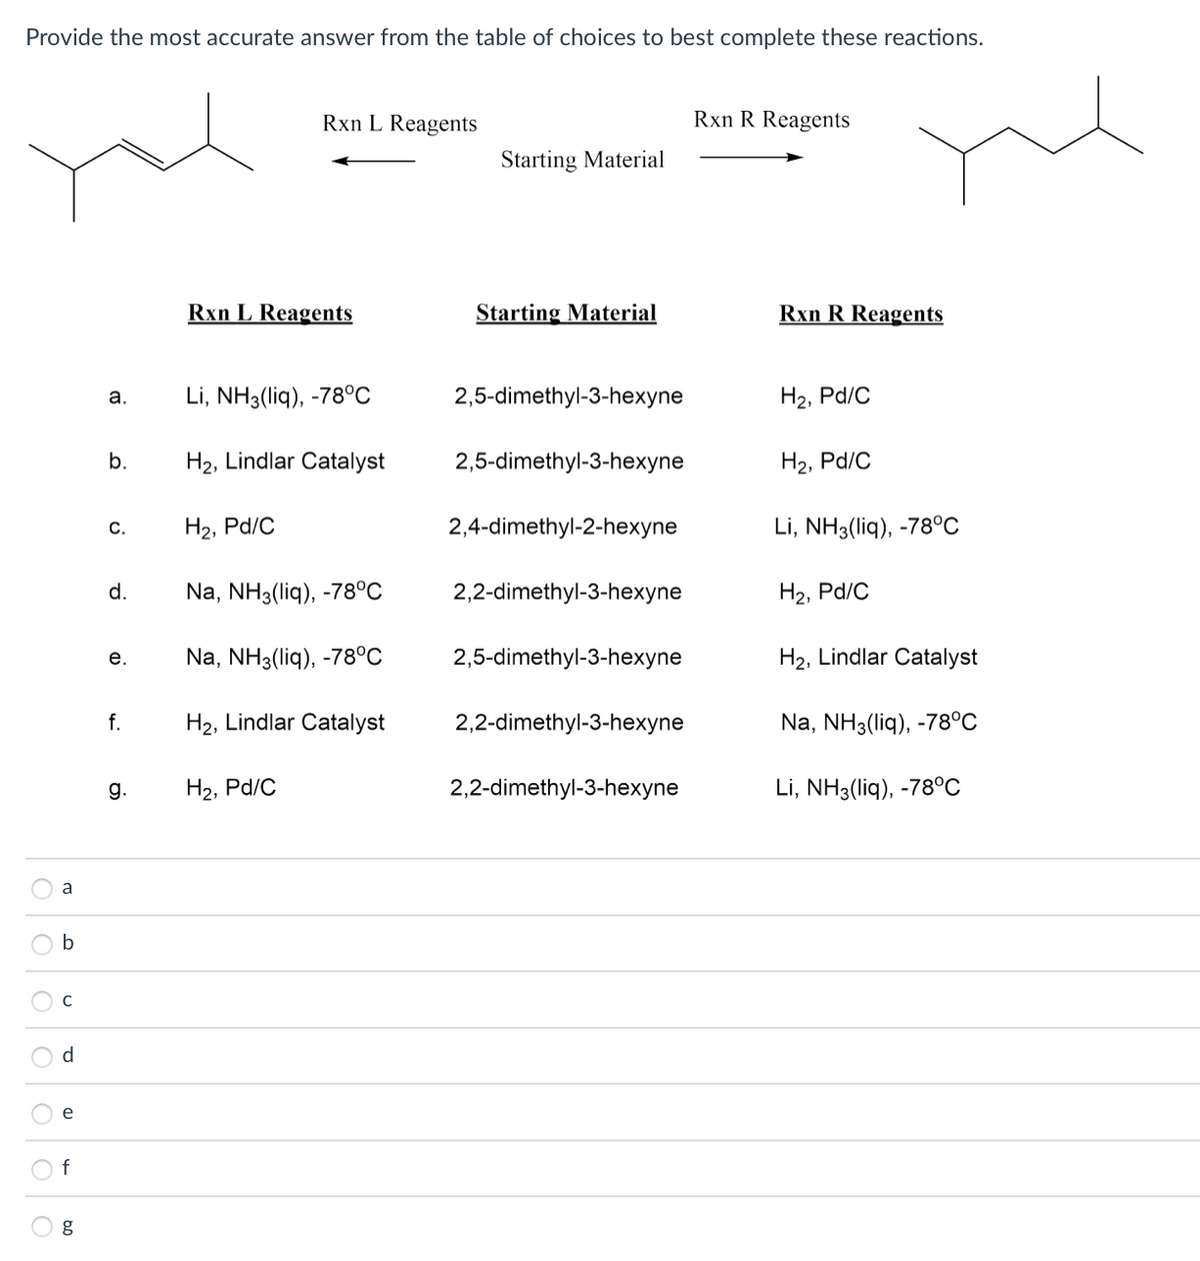 Provide the most accurate answer from the table of choices to best complete these reactions.
Rxn L Reagents
Rxn R Reagents
Starting Material
Rxn L Reagents
Starting Material
Rxn R Reagents
Li, NH3(liq), -78°C
2,5-dimethyl-3-hexyne
На, Pd/C
а.
b.
H2, Lindlar Catalyst
2,5-dimethyl-3-hexyne
На, Pа/C
H2, Pd/C
2,4-dimethyl-2-hexyne
Li, NH3(liq), -78°C
С.
d.
Na, NH3(liq), -78°C
2,2-dimethyl-3-hехyne
H2, Pd/C
Na, NH3(liq), -78°C
2,5-dimethyl-3-hexyne
H2, Lindlar Catalyst
е.
f.
H2, Lindlar Catalyst
2,2-dimethyl-3-hexyne
Na, NH3(liq), -78°C
g.
H2, Pd/C
2,2-dimethyl-3-hexyne
Li, NH3(liq), -78°C
a
C
d
e
f
O O O
